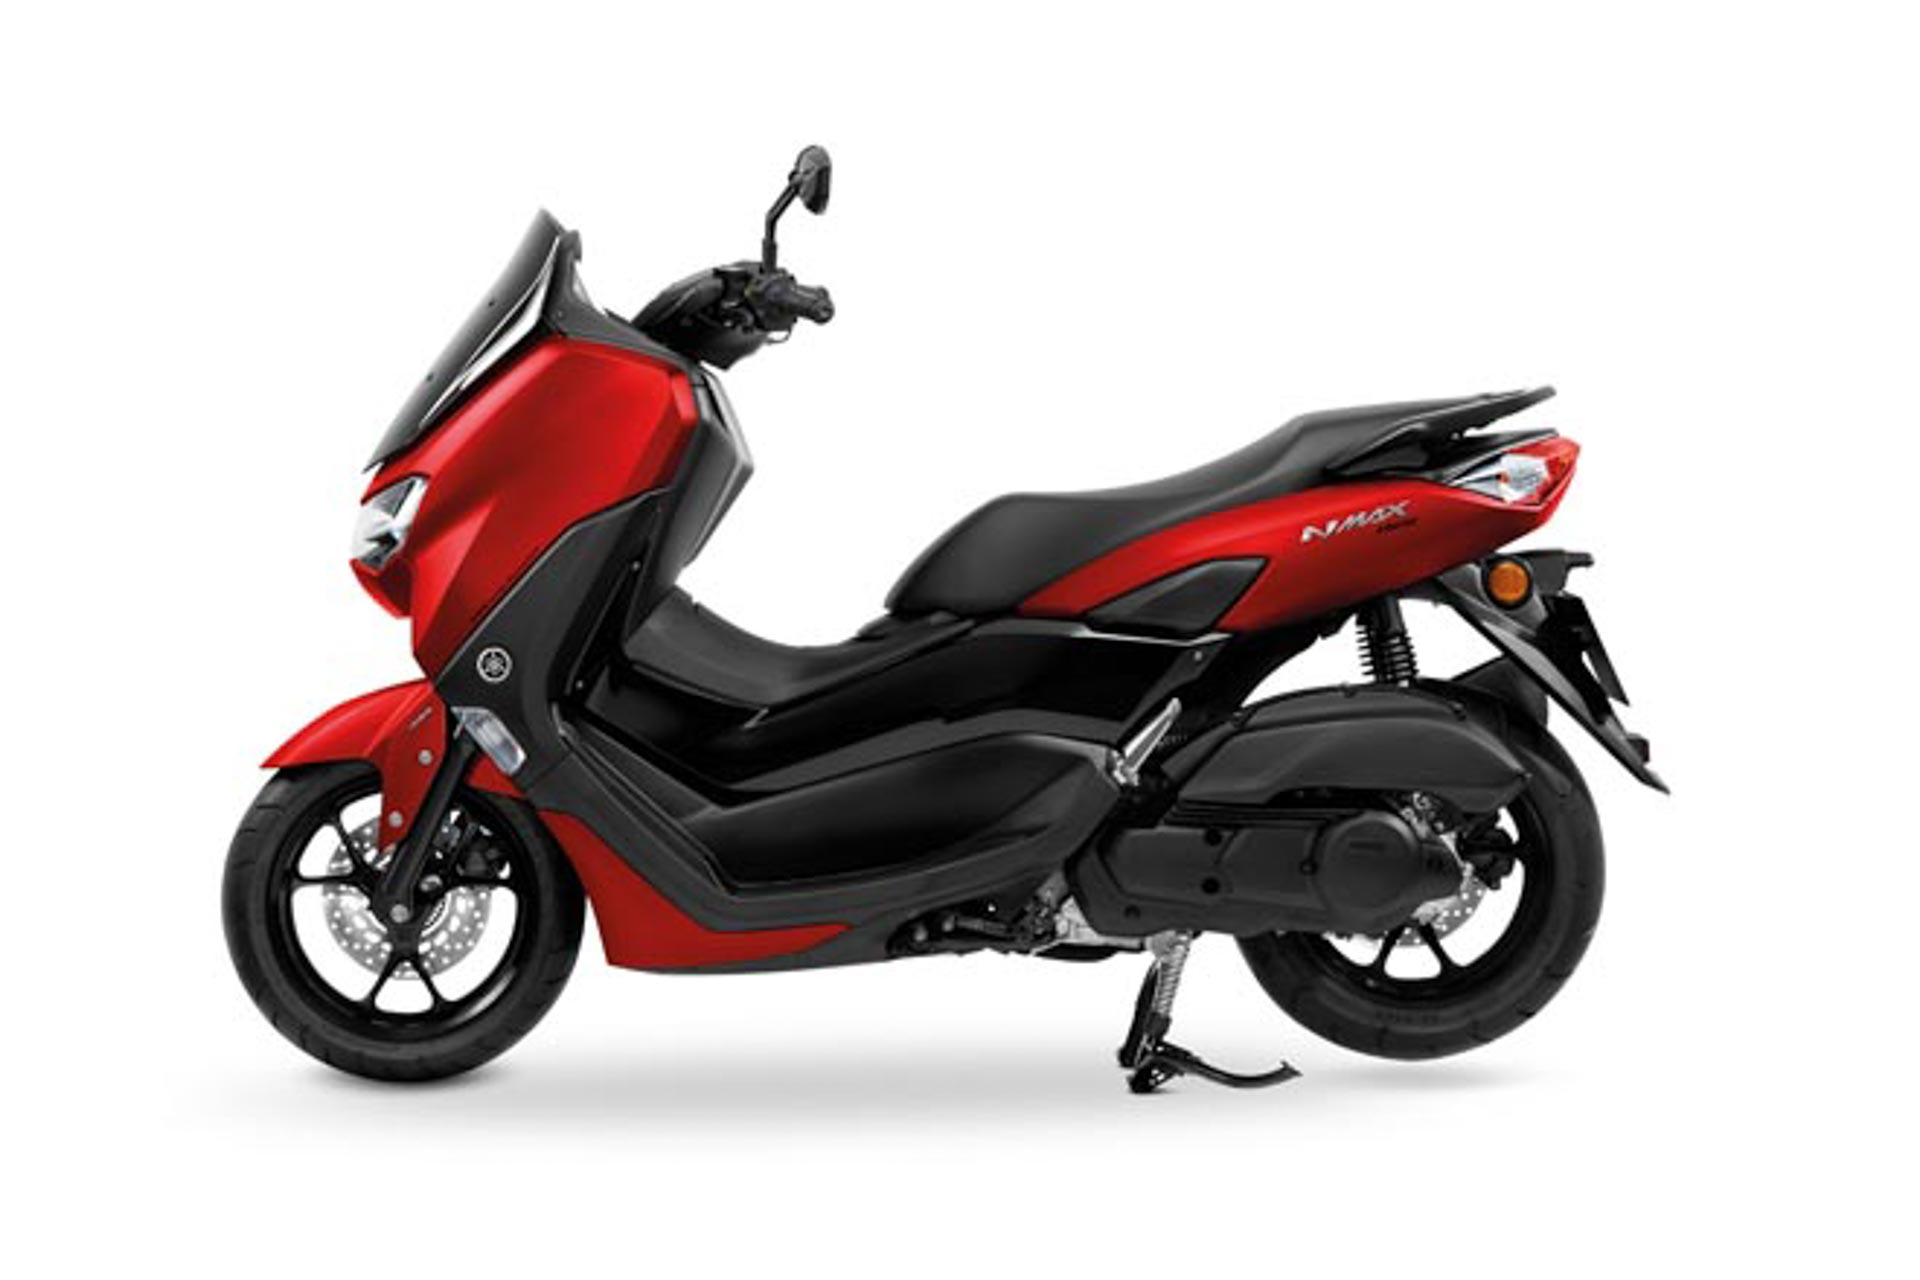 2020 Yamaha NMax 155 Launched With Many Updates